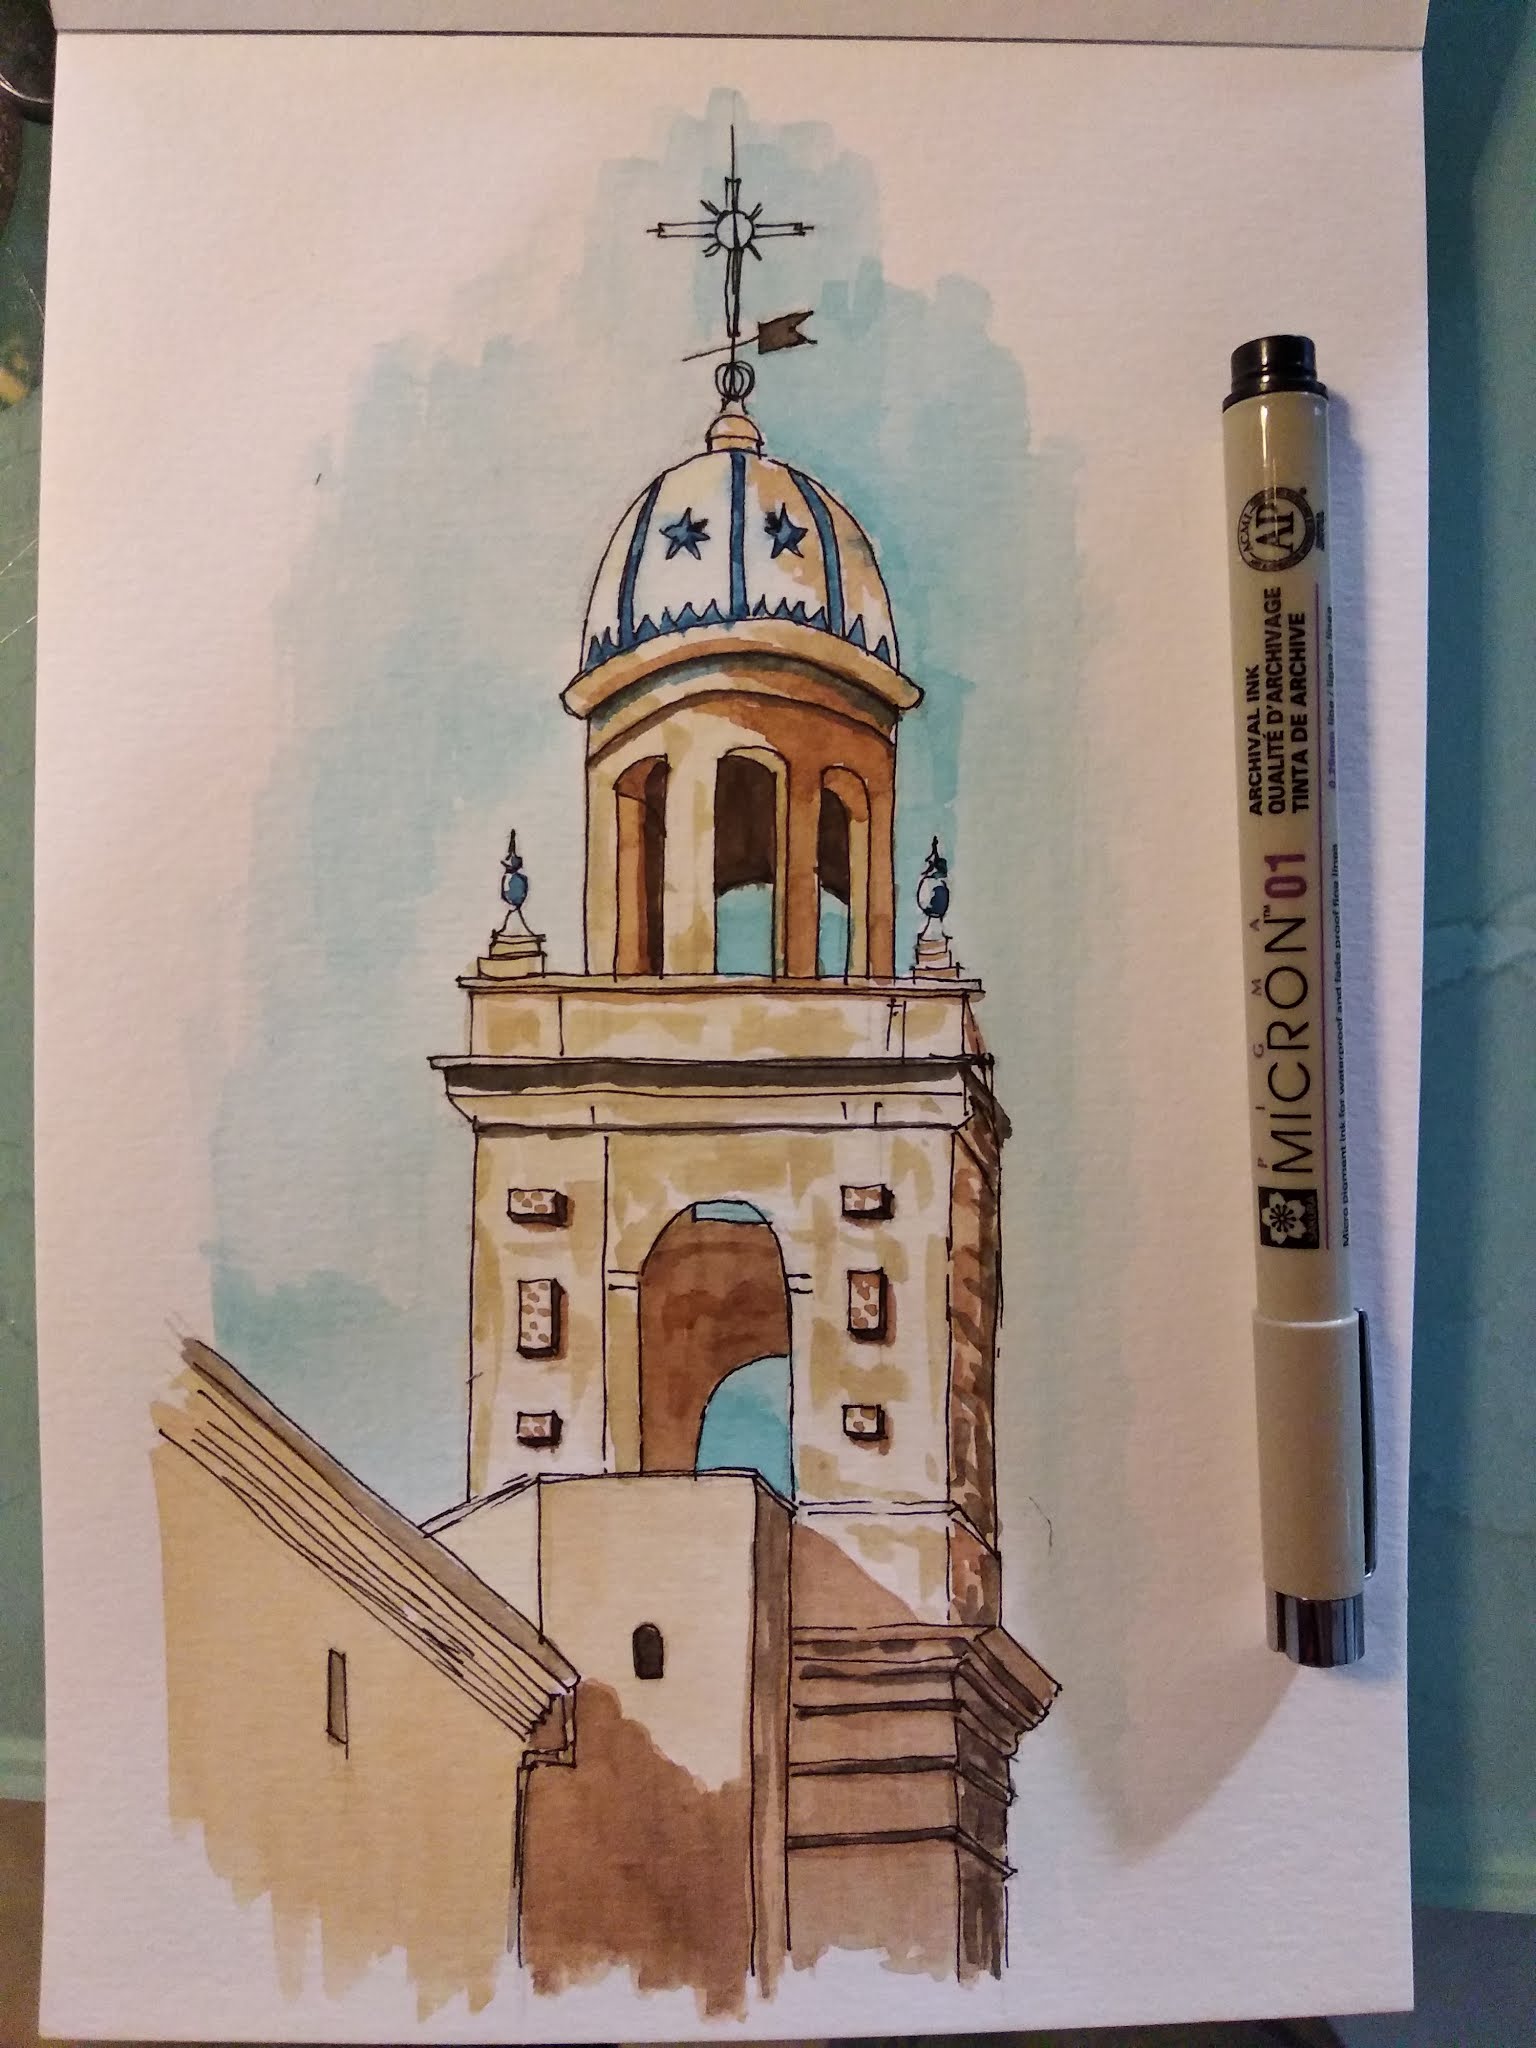 the tower of a church